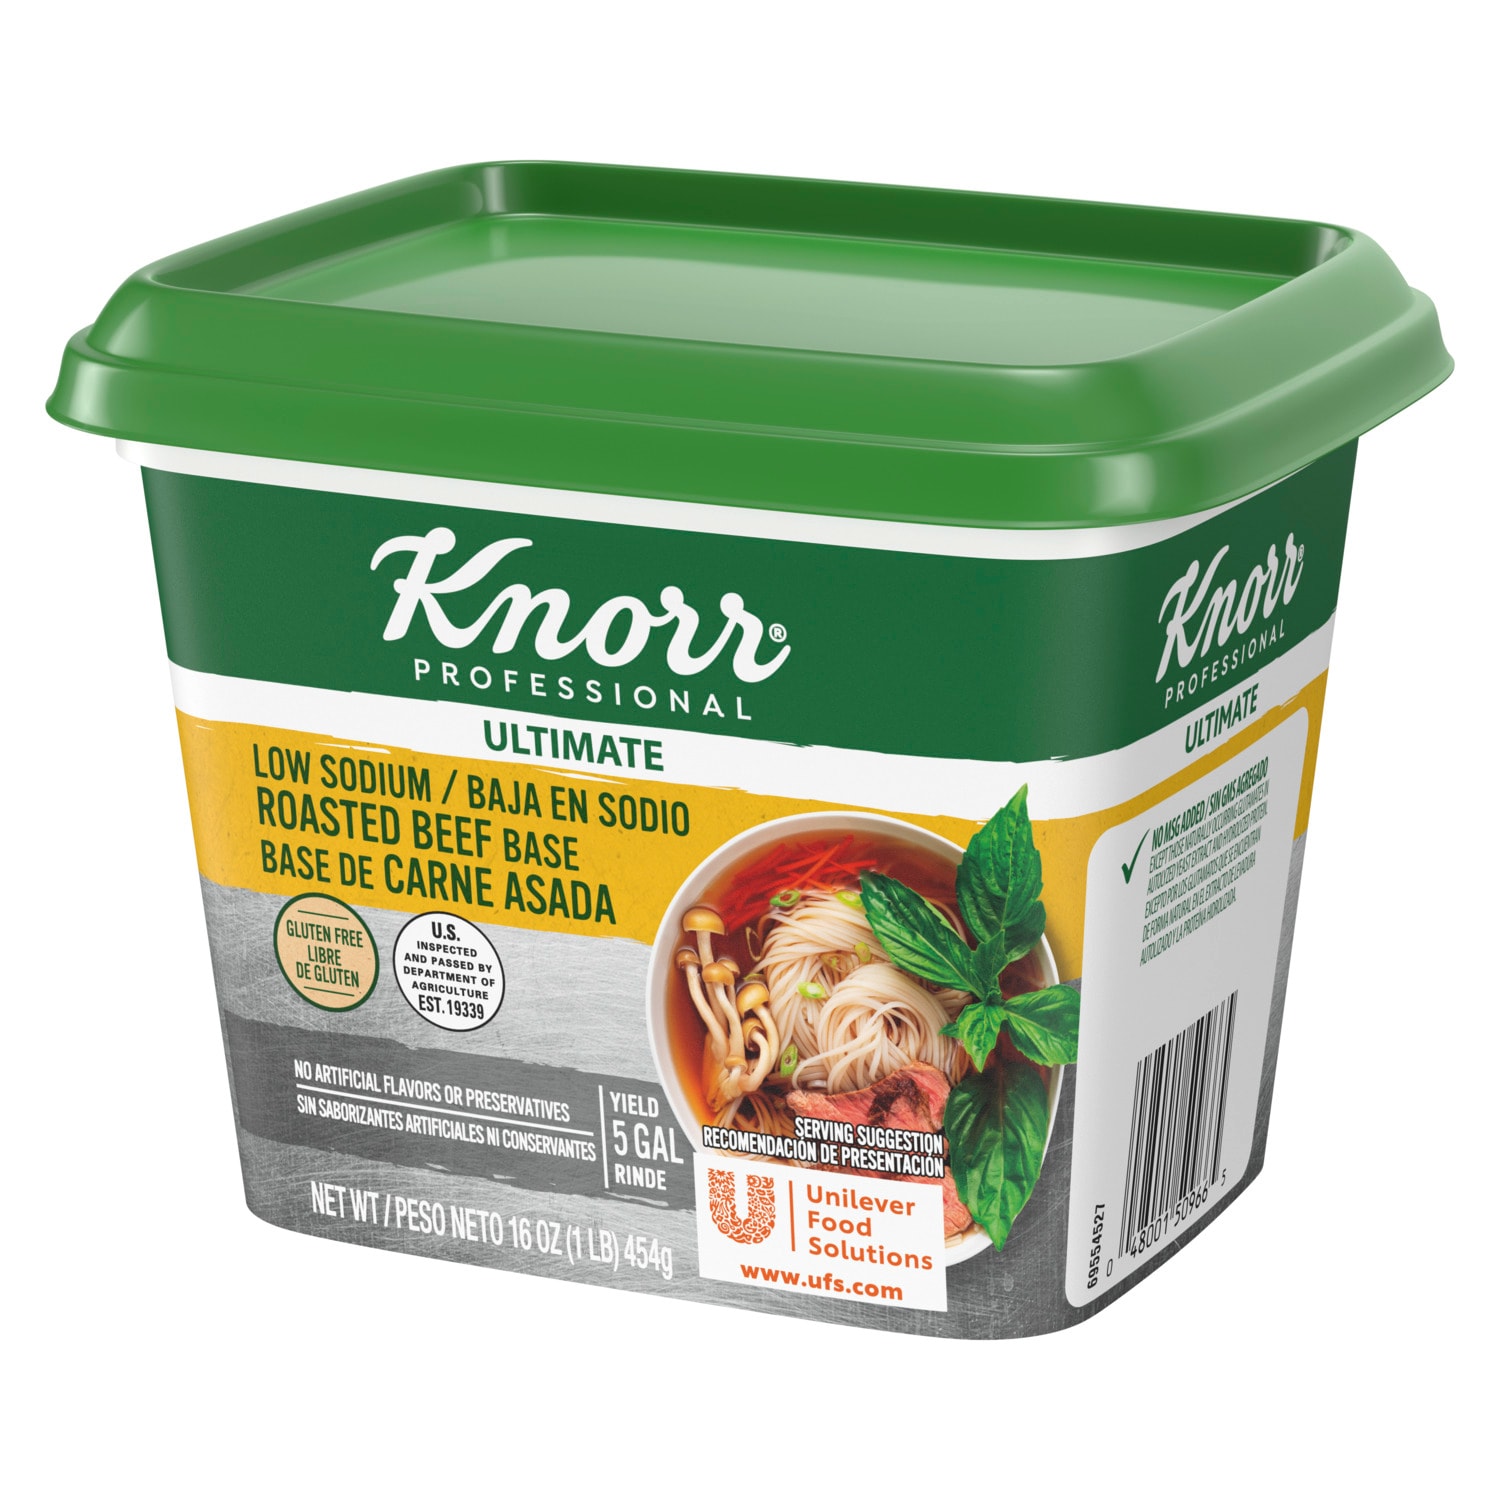 Knorr® Professional Ultimate Low Sodium Beef 1lb. 6 Pack - Excess salt in bases masks the true flavor of soups - not in Knorr® Professional Ultimate Low Sodium Beef Bouillon Base 6 x 1 lb!